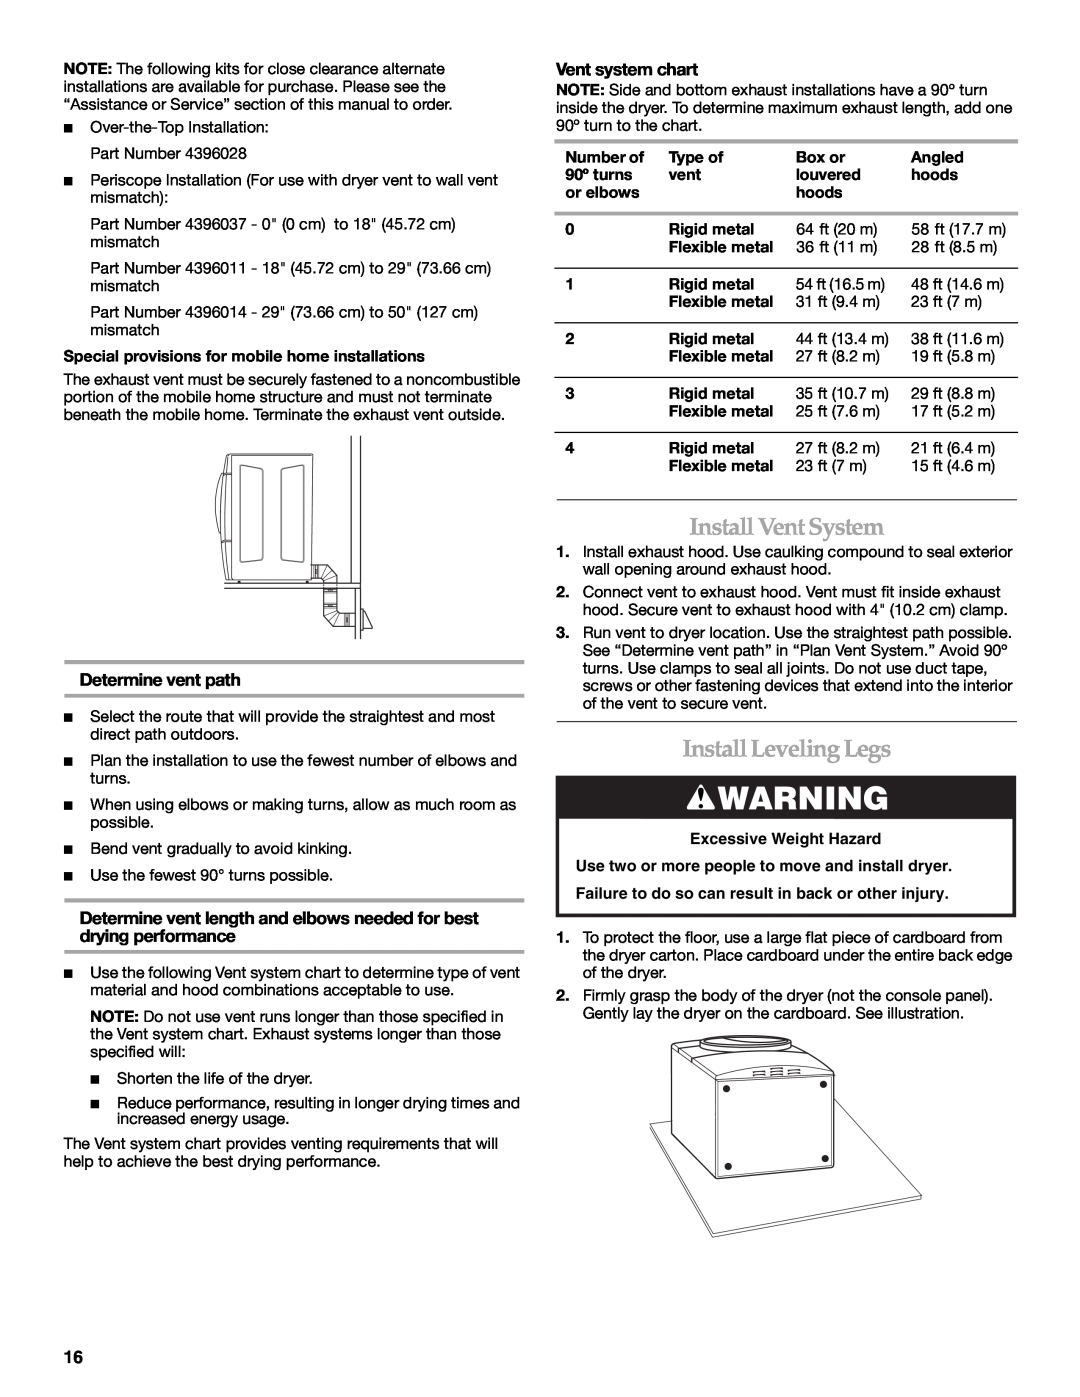 Maytag W10099070 InstallVent System, InstallLeveling Legs, Determine vent path, Vent system chart, Number of, Type of 